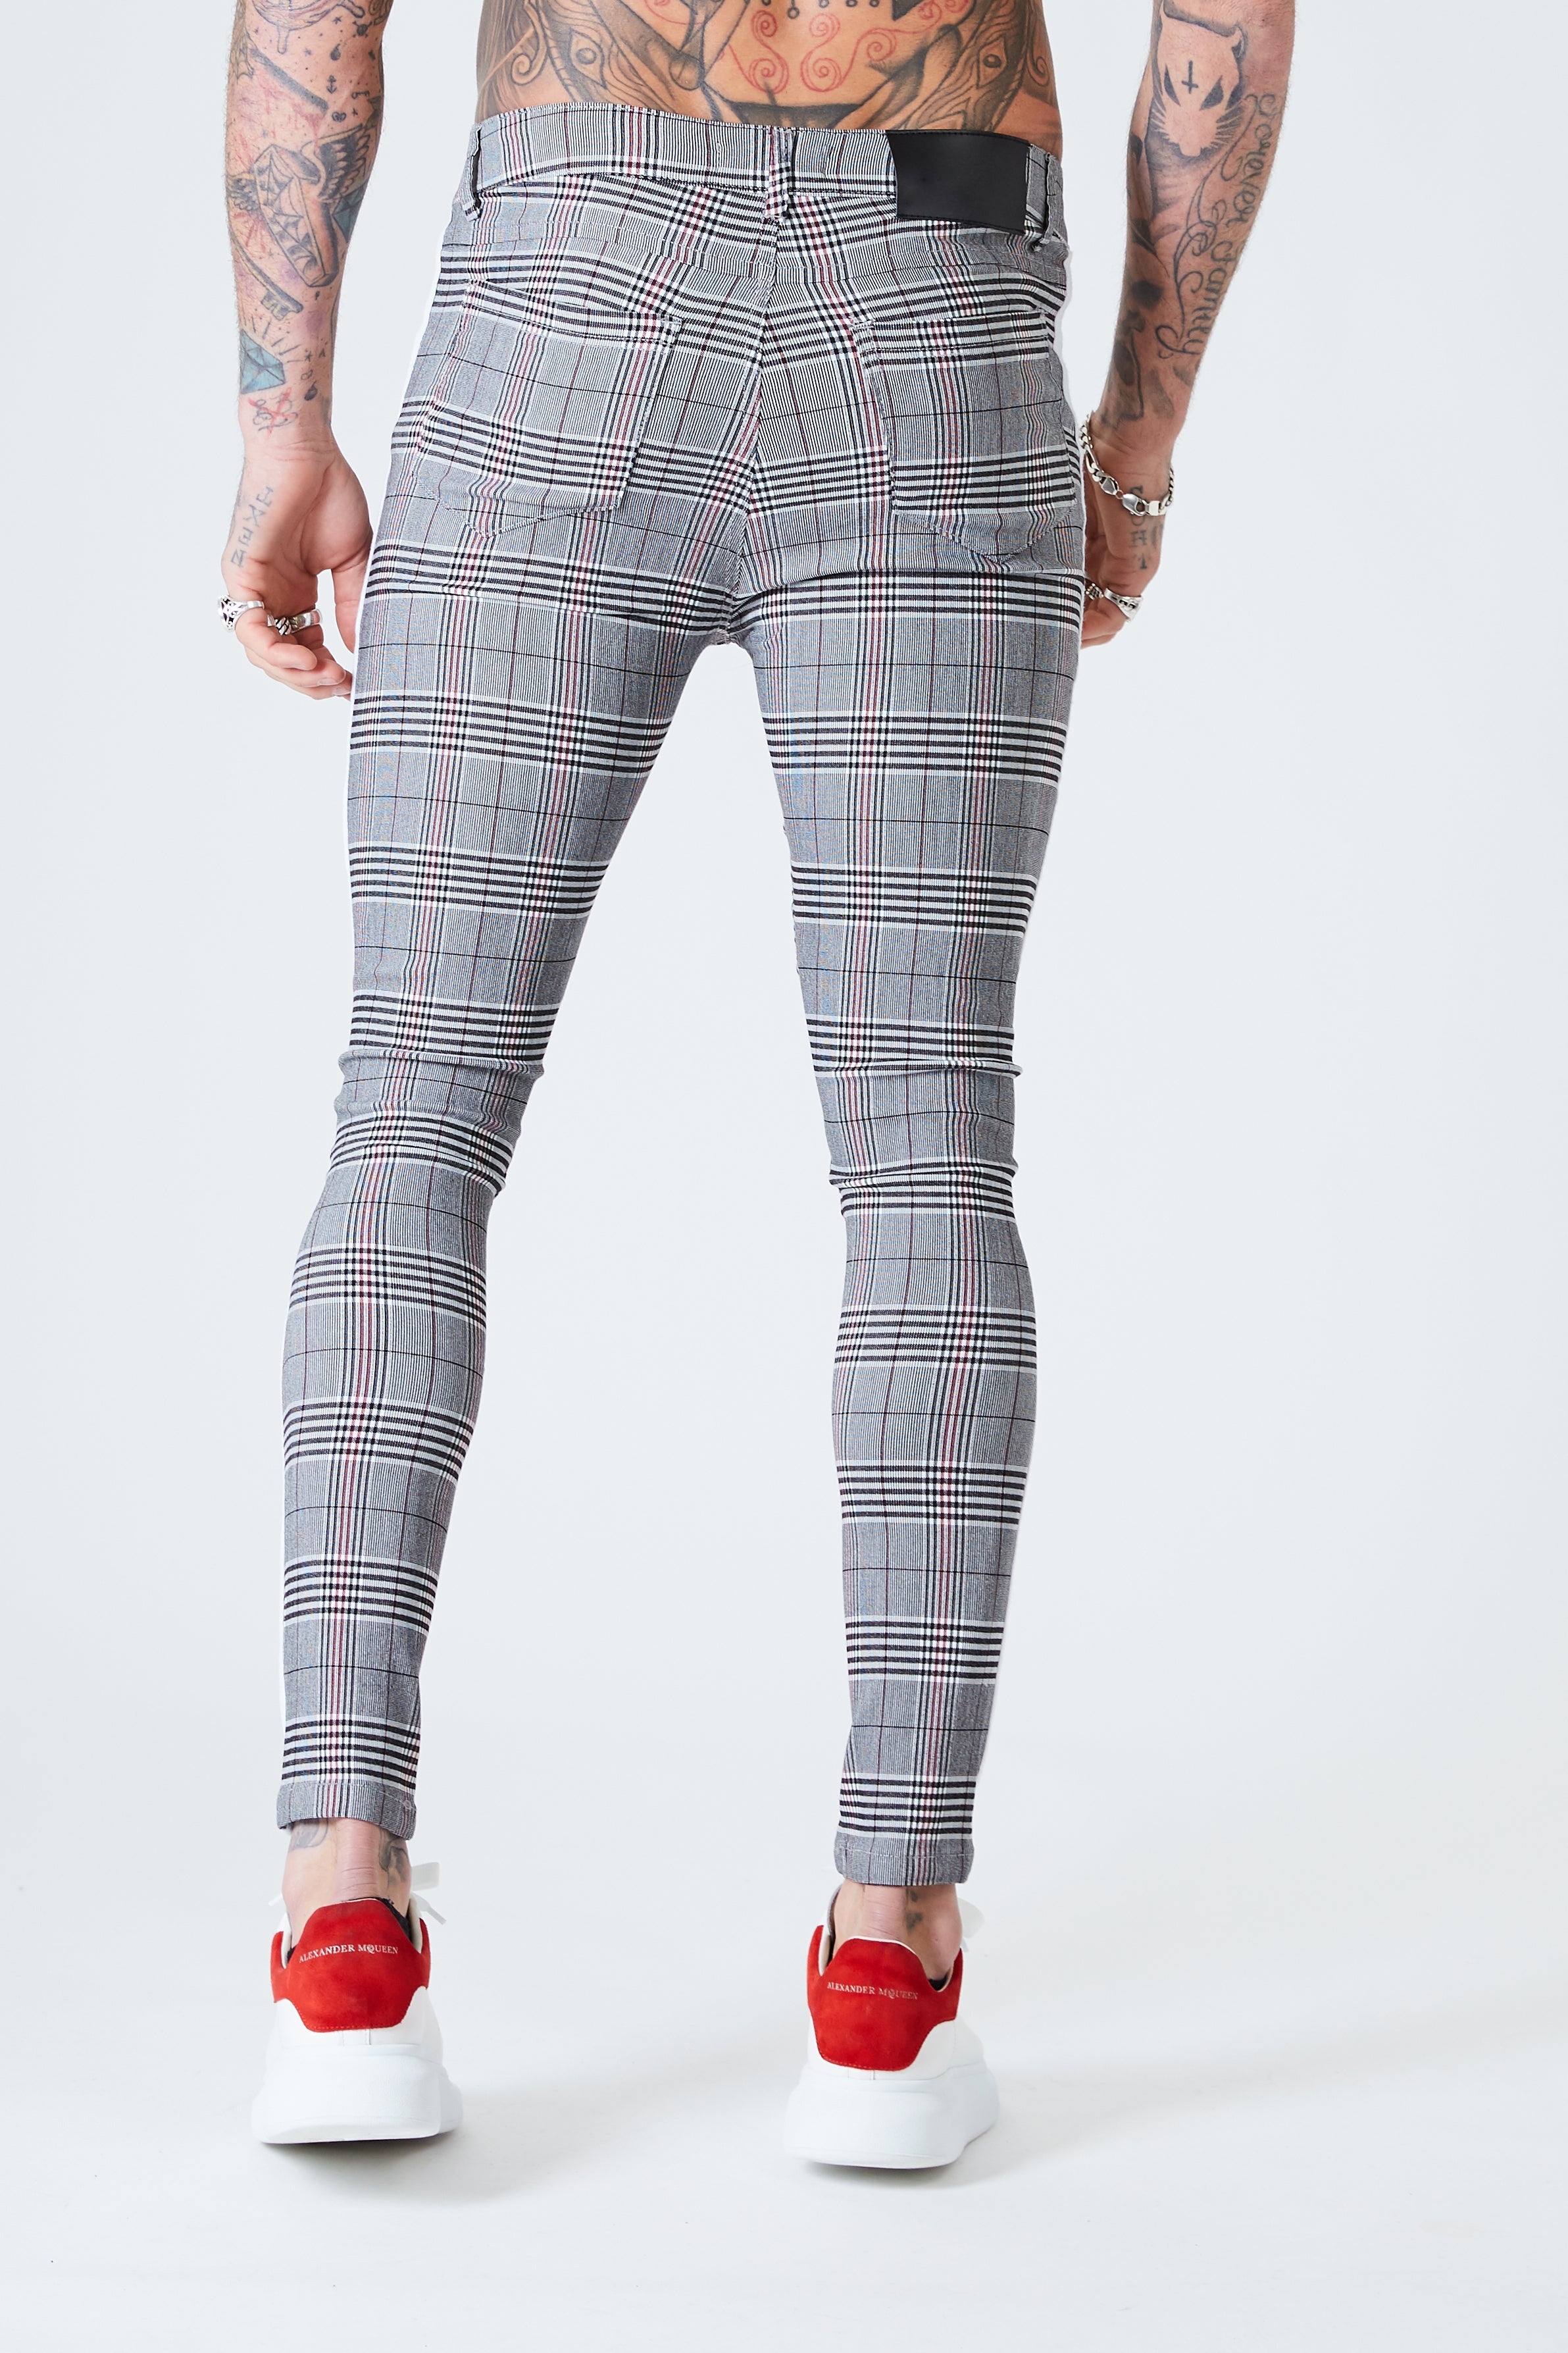 Grey Check Trousers - Buy Grey Check Trousers online in India